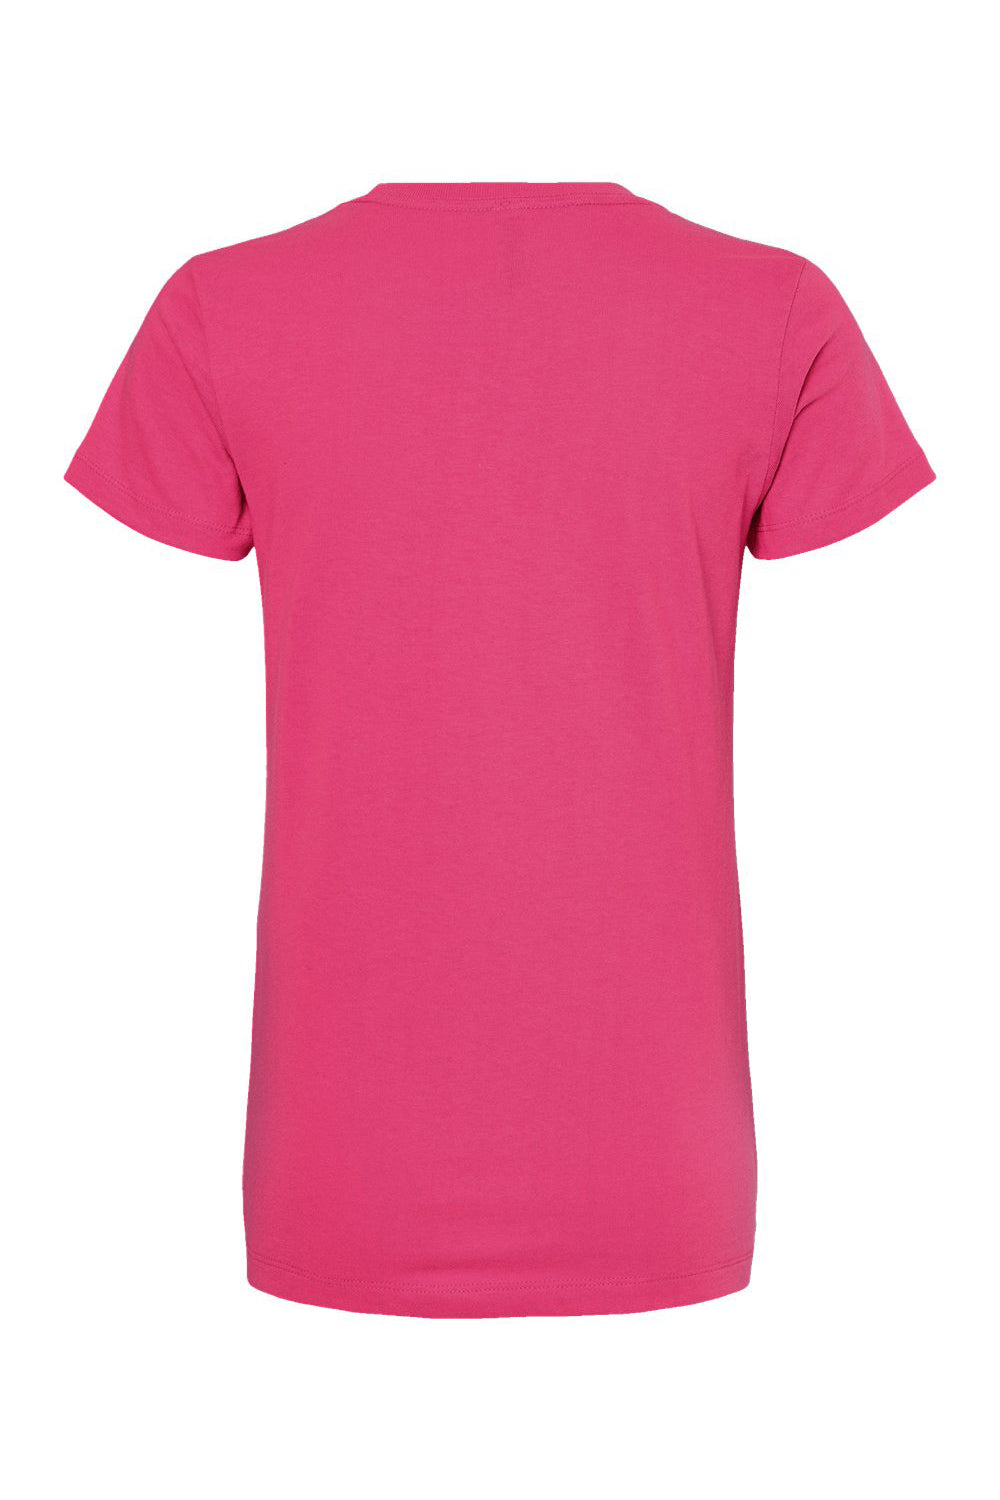 M&O 4810 Womens Gold Soft Touch Short Sleeve Crewneck T-Shirt Heliconia Pink Flat Back